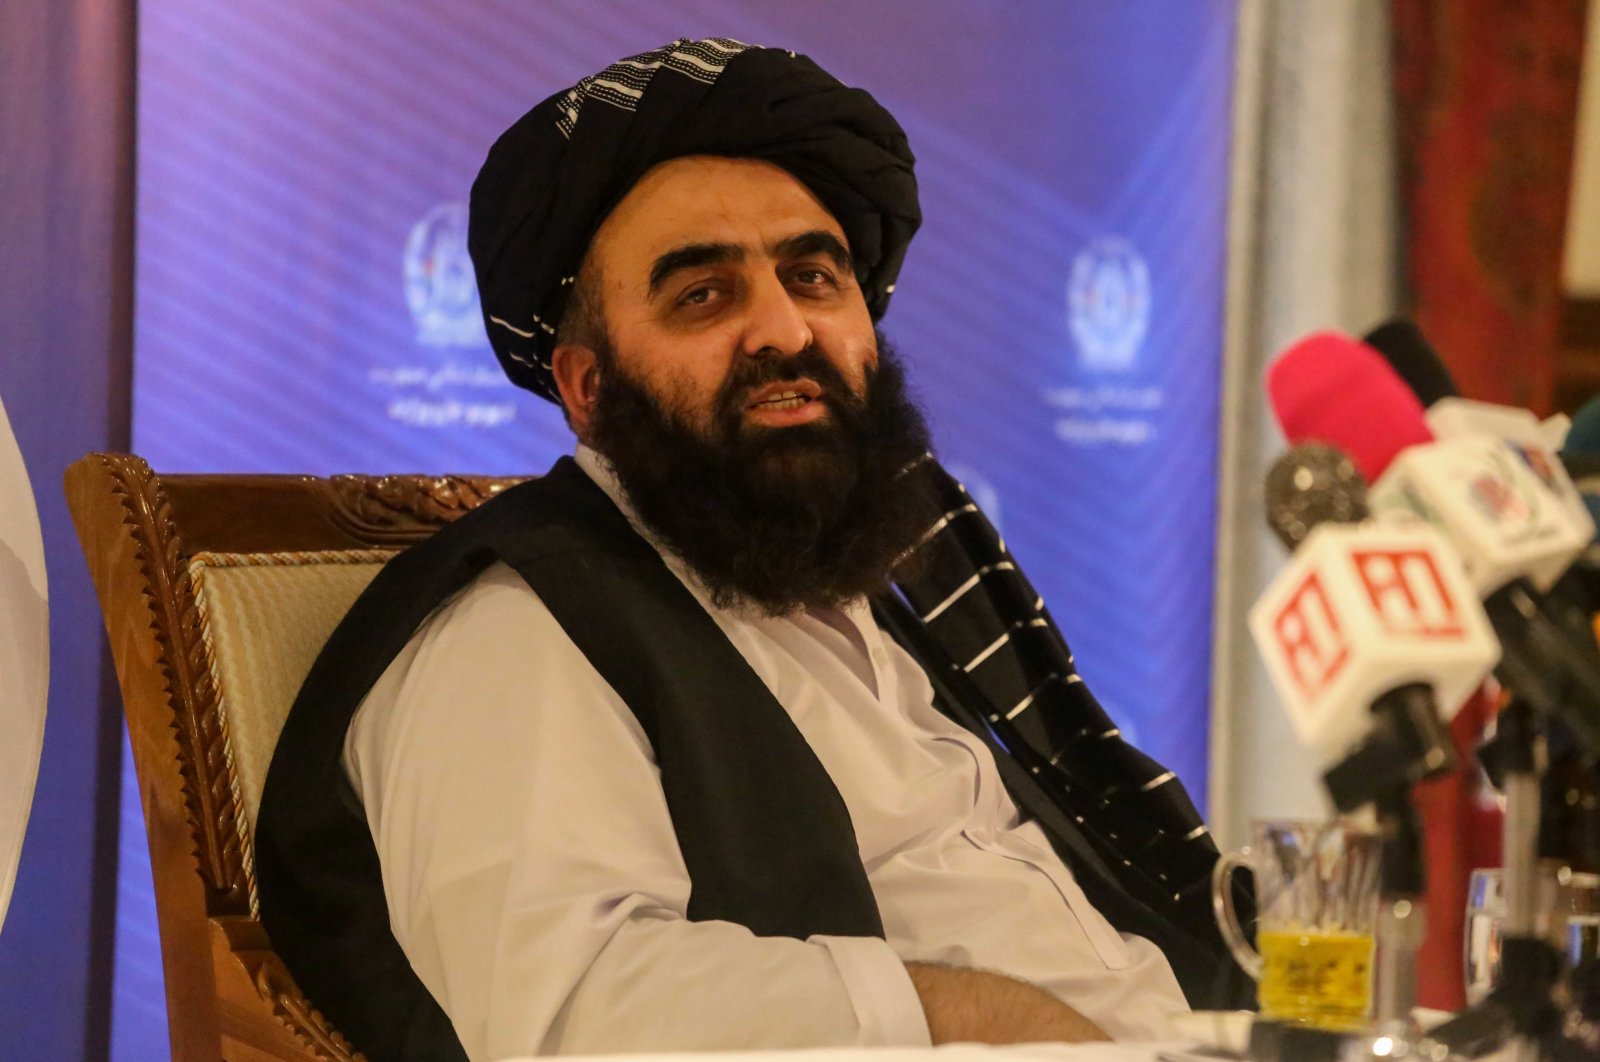 Amir Khan Muttaqi, the Taliban's acting Foreign Minister, talks with journalists during a press conference in Kabul, Afghanistan, Sept. 14, 2021. (EPA Photo)